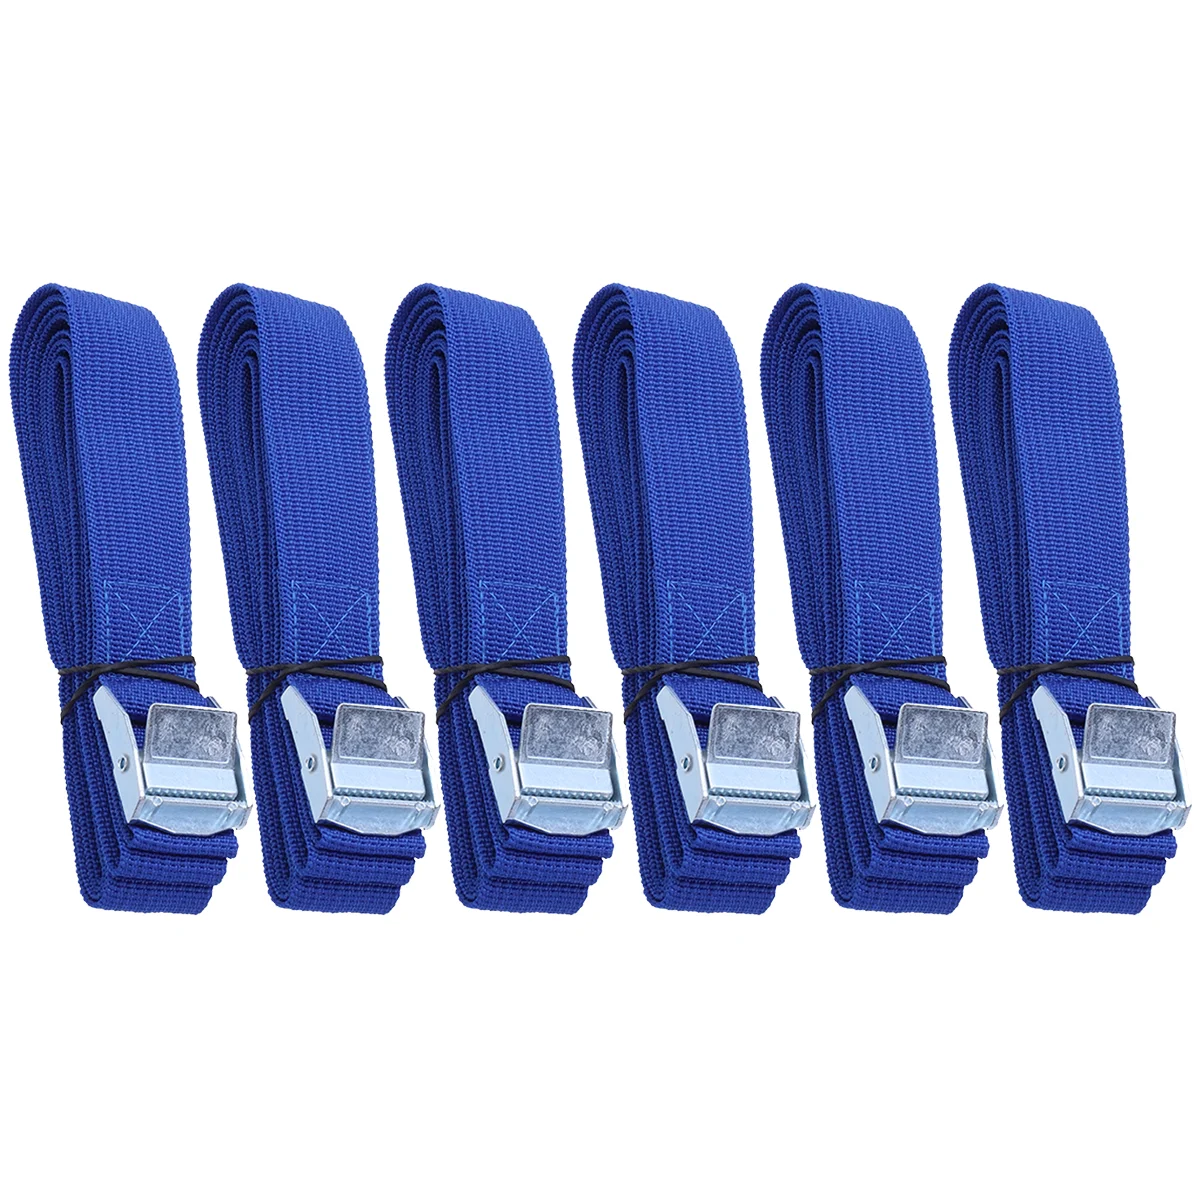 

6PCS Polyester Quick Release Lashing with Buckle Tying Straps for Cargo Tie Down Car Roof Rack Luggage Kayak Carrier Motorcycle